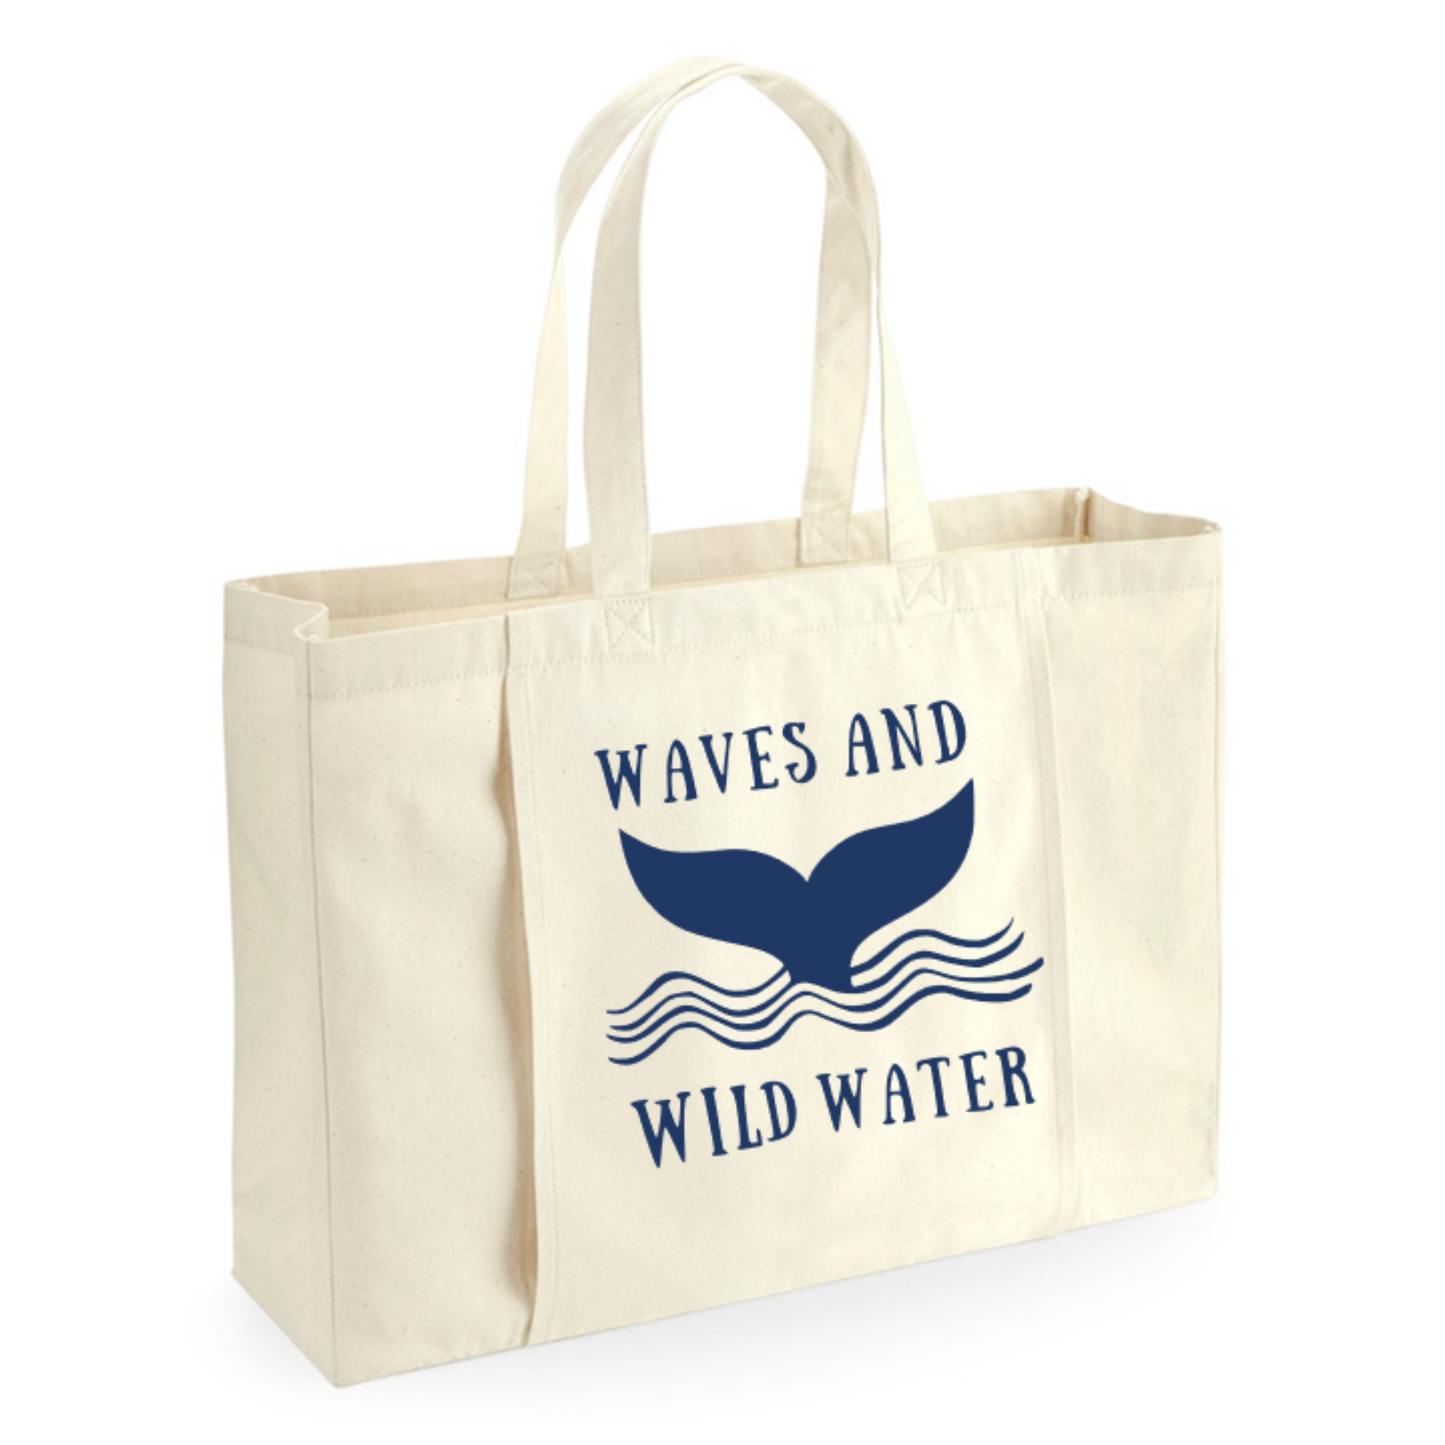 A natural cream coloured tote bag, with Waves & Wild Water logo on the front in blue.